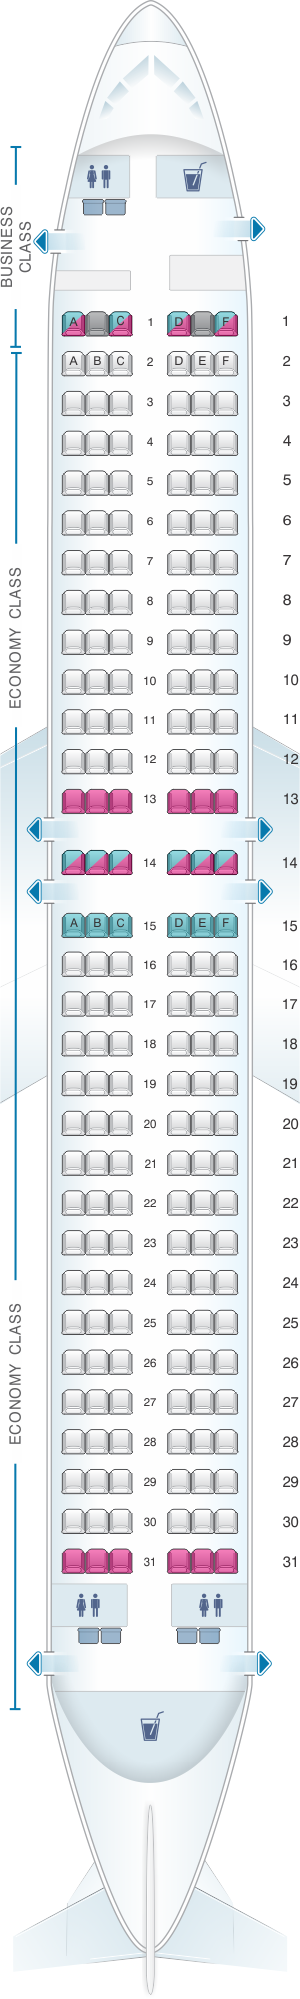 Seat map for airberlin Boeing B737 800